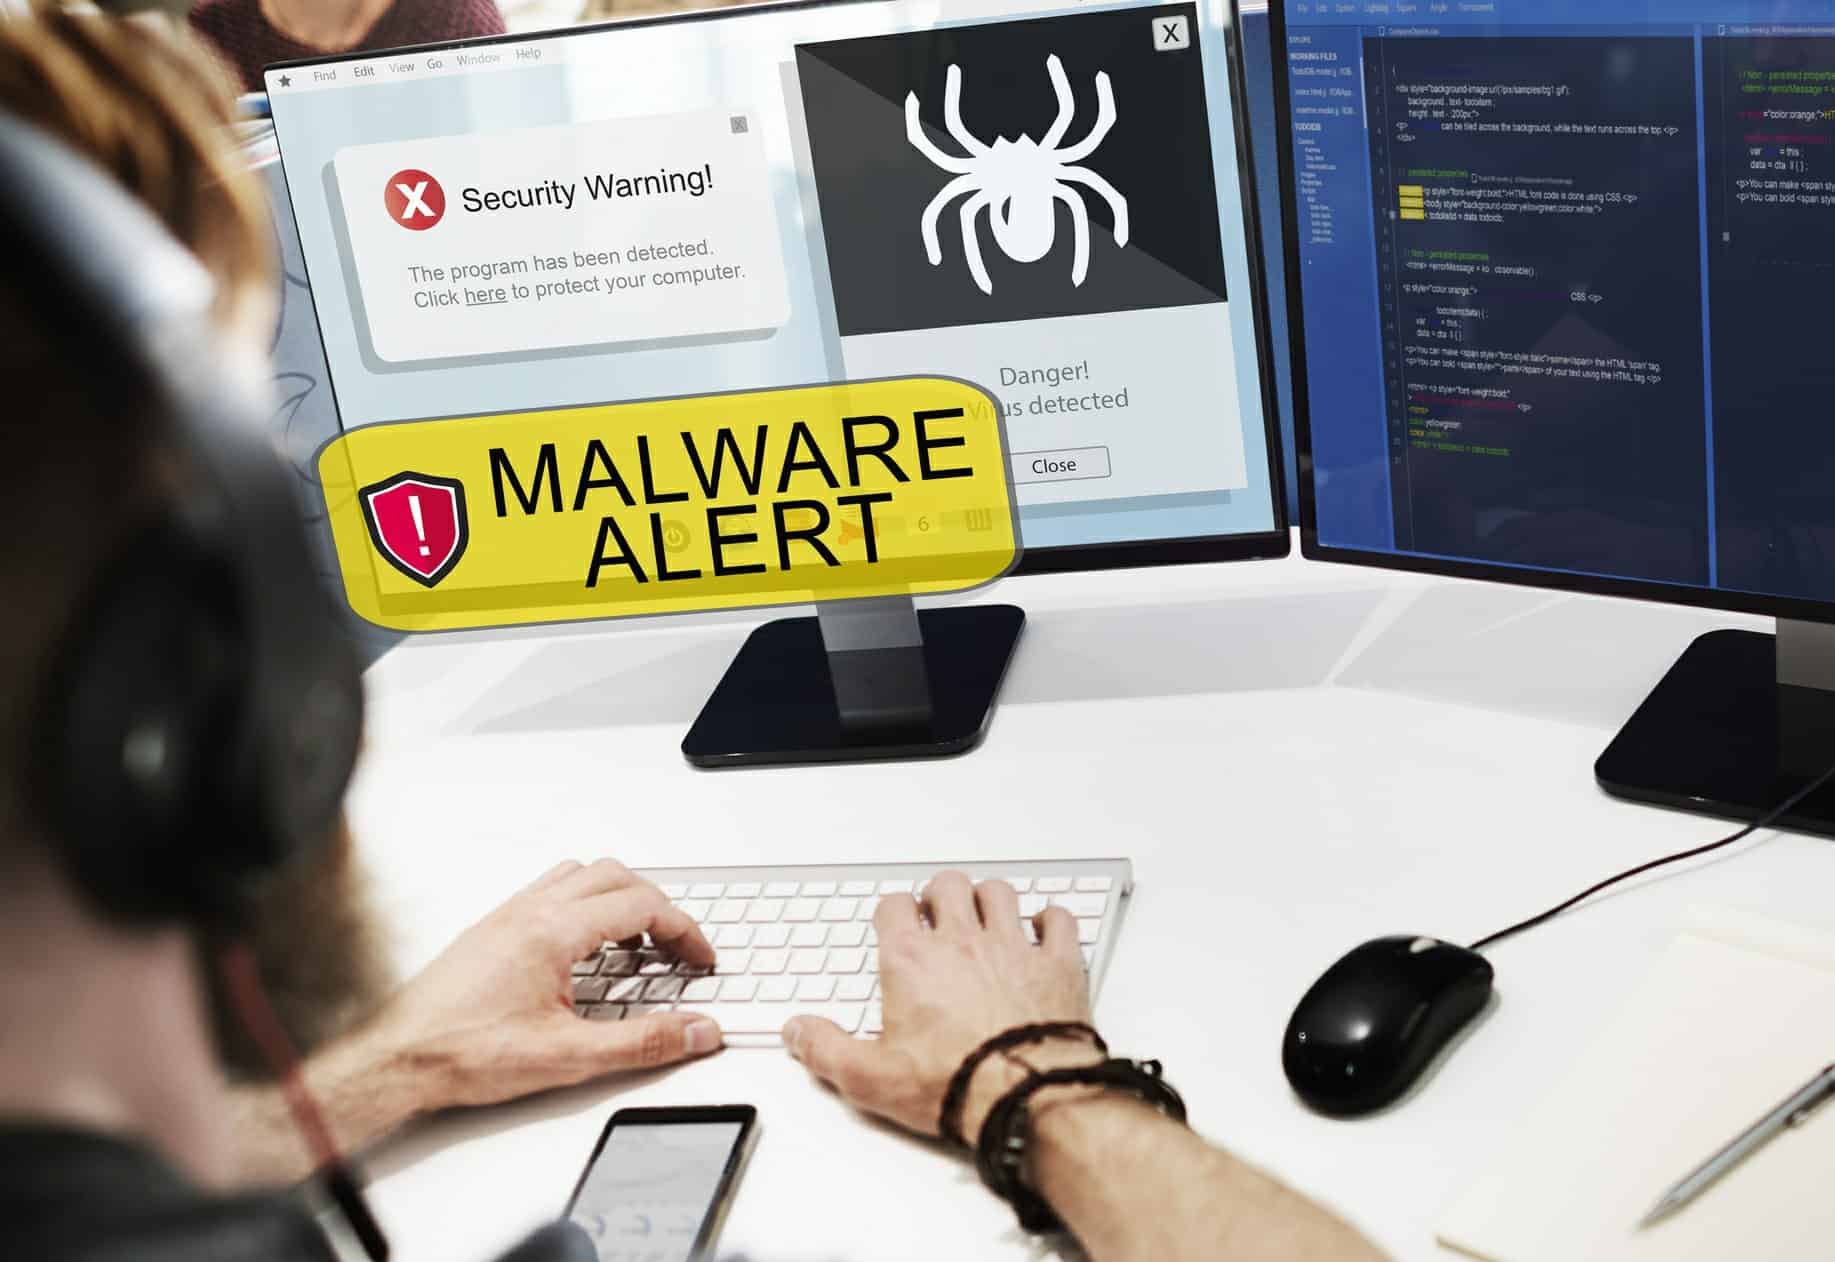 Malware removal being performed by WordPress troubleshooting service employee